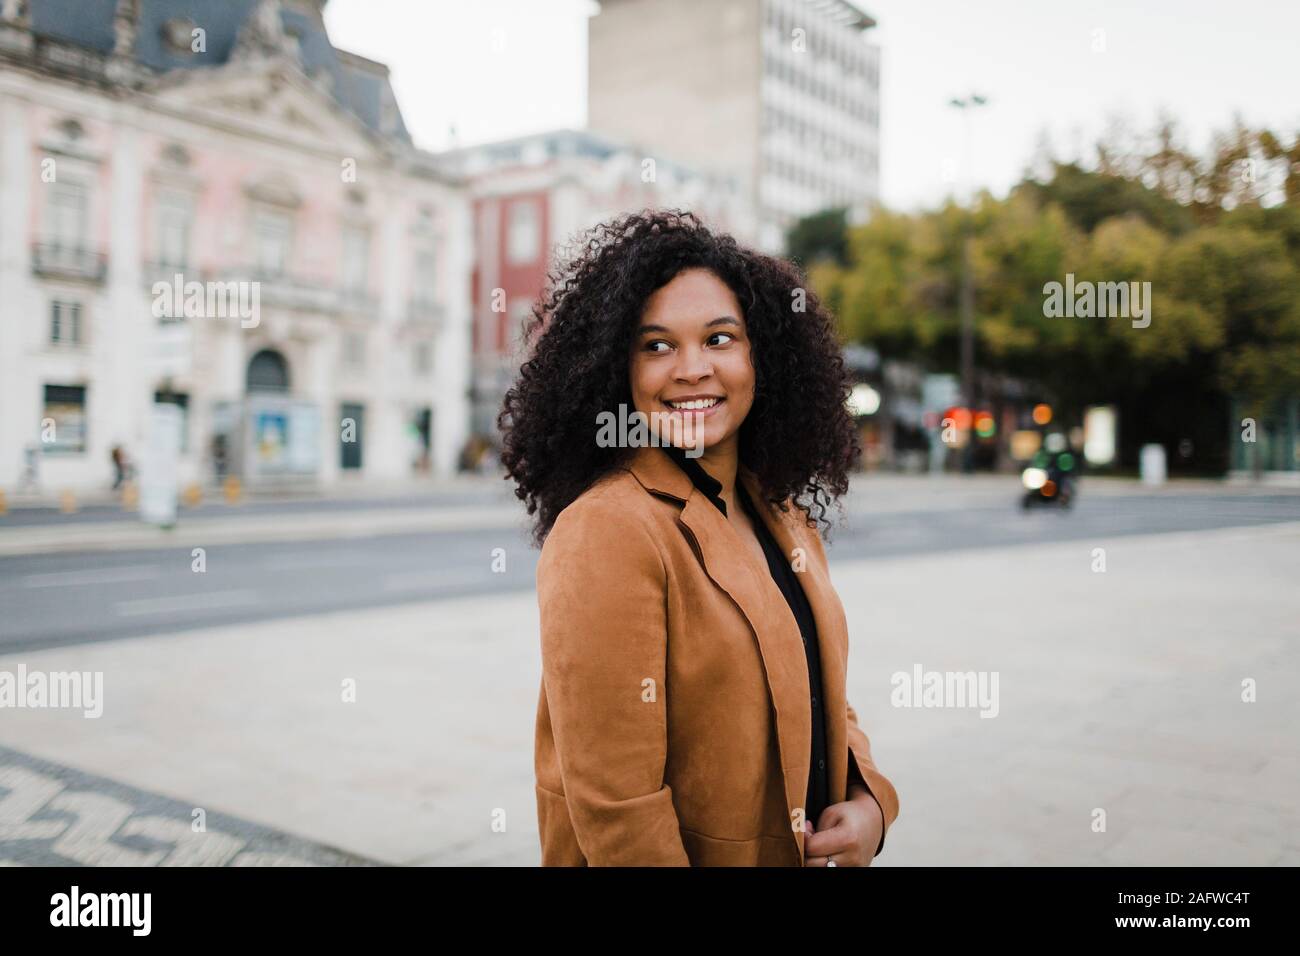 Happy young woman looking over Shoulder on urban street Banque D'Images